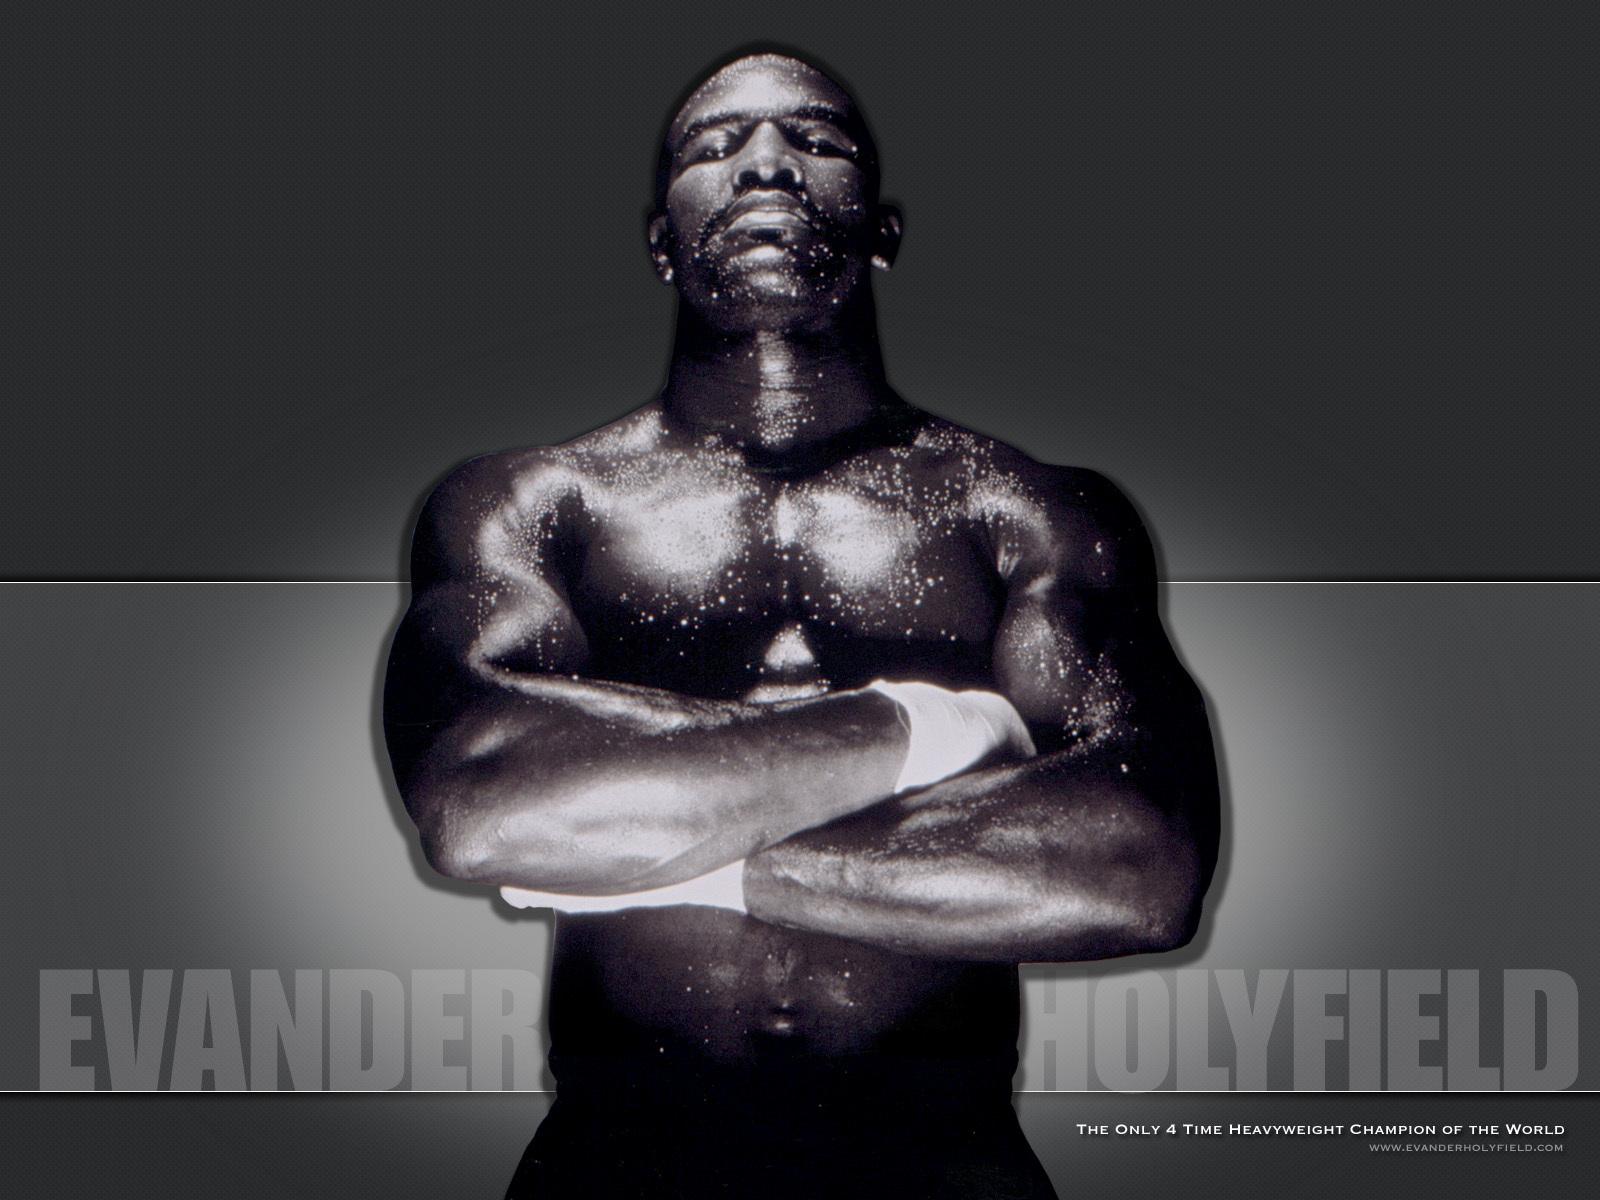 Iron Boxer Evander Holyfield wallpaper and image